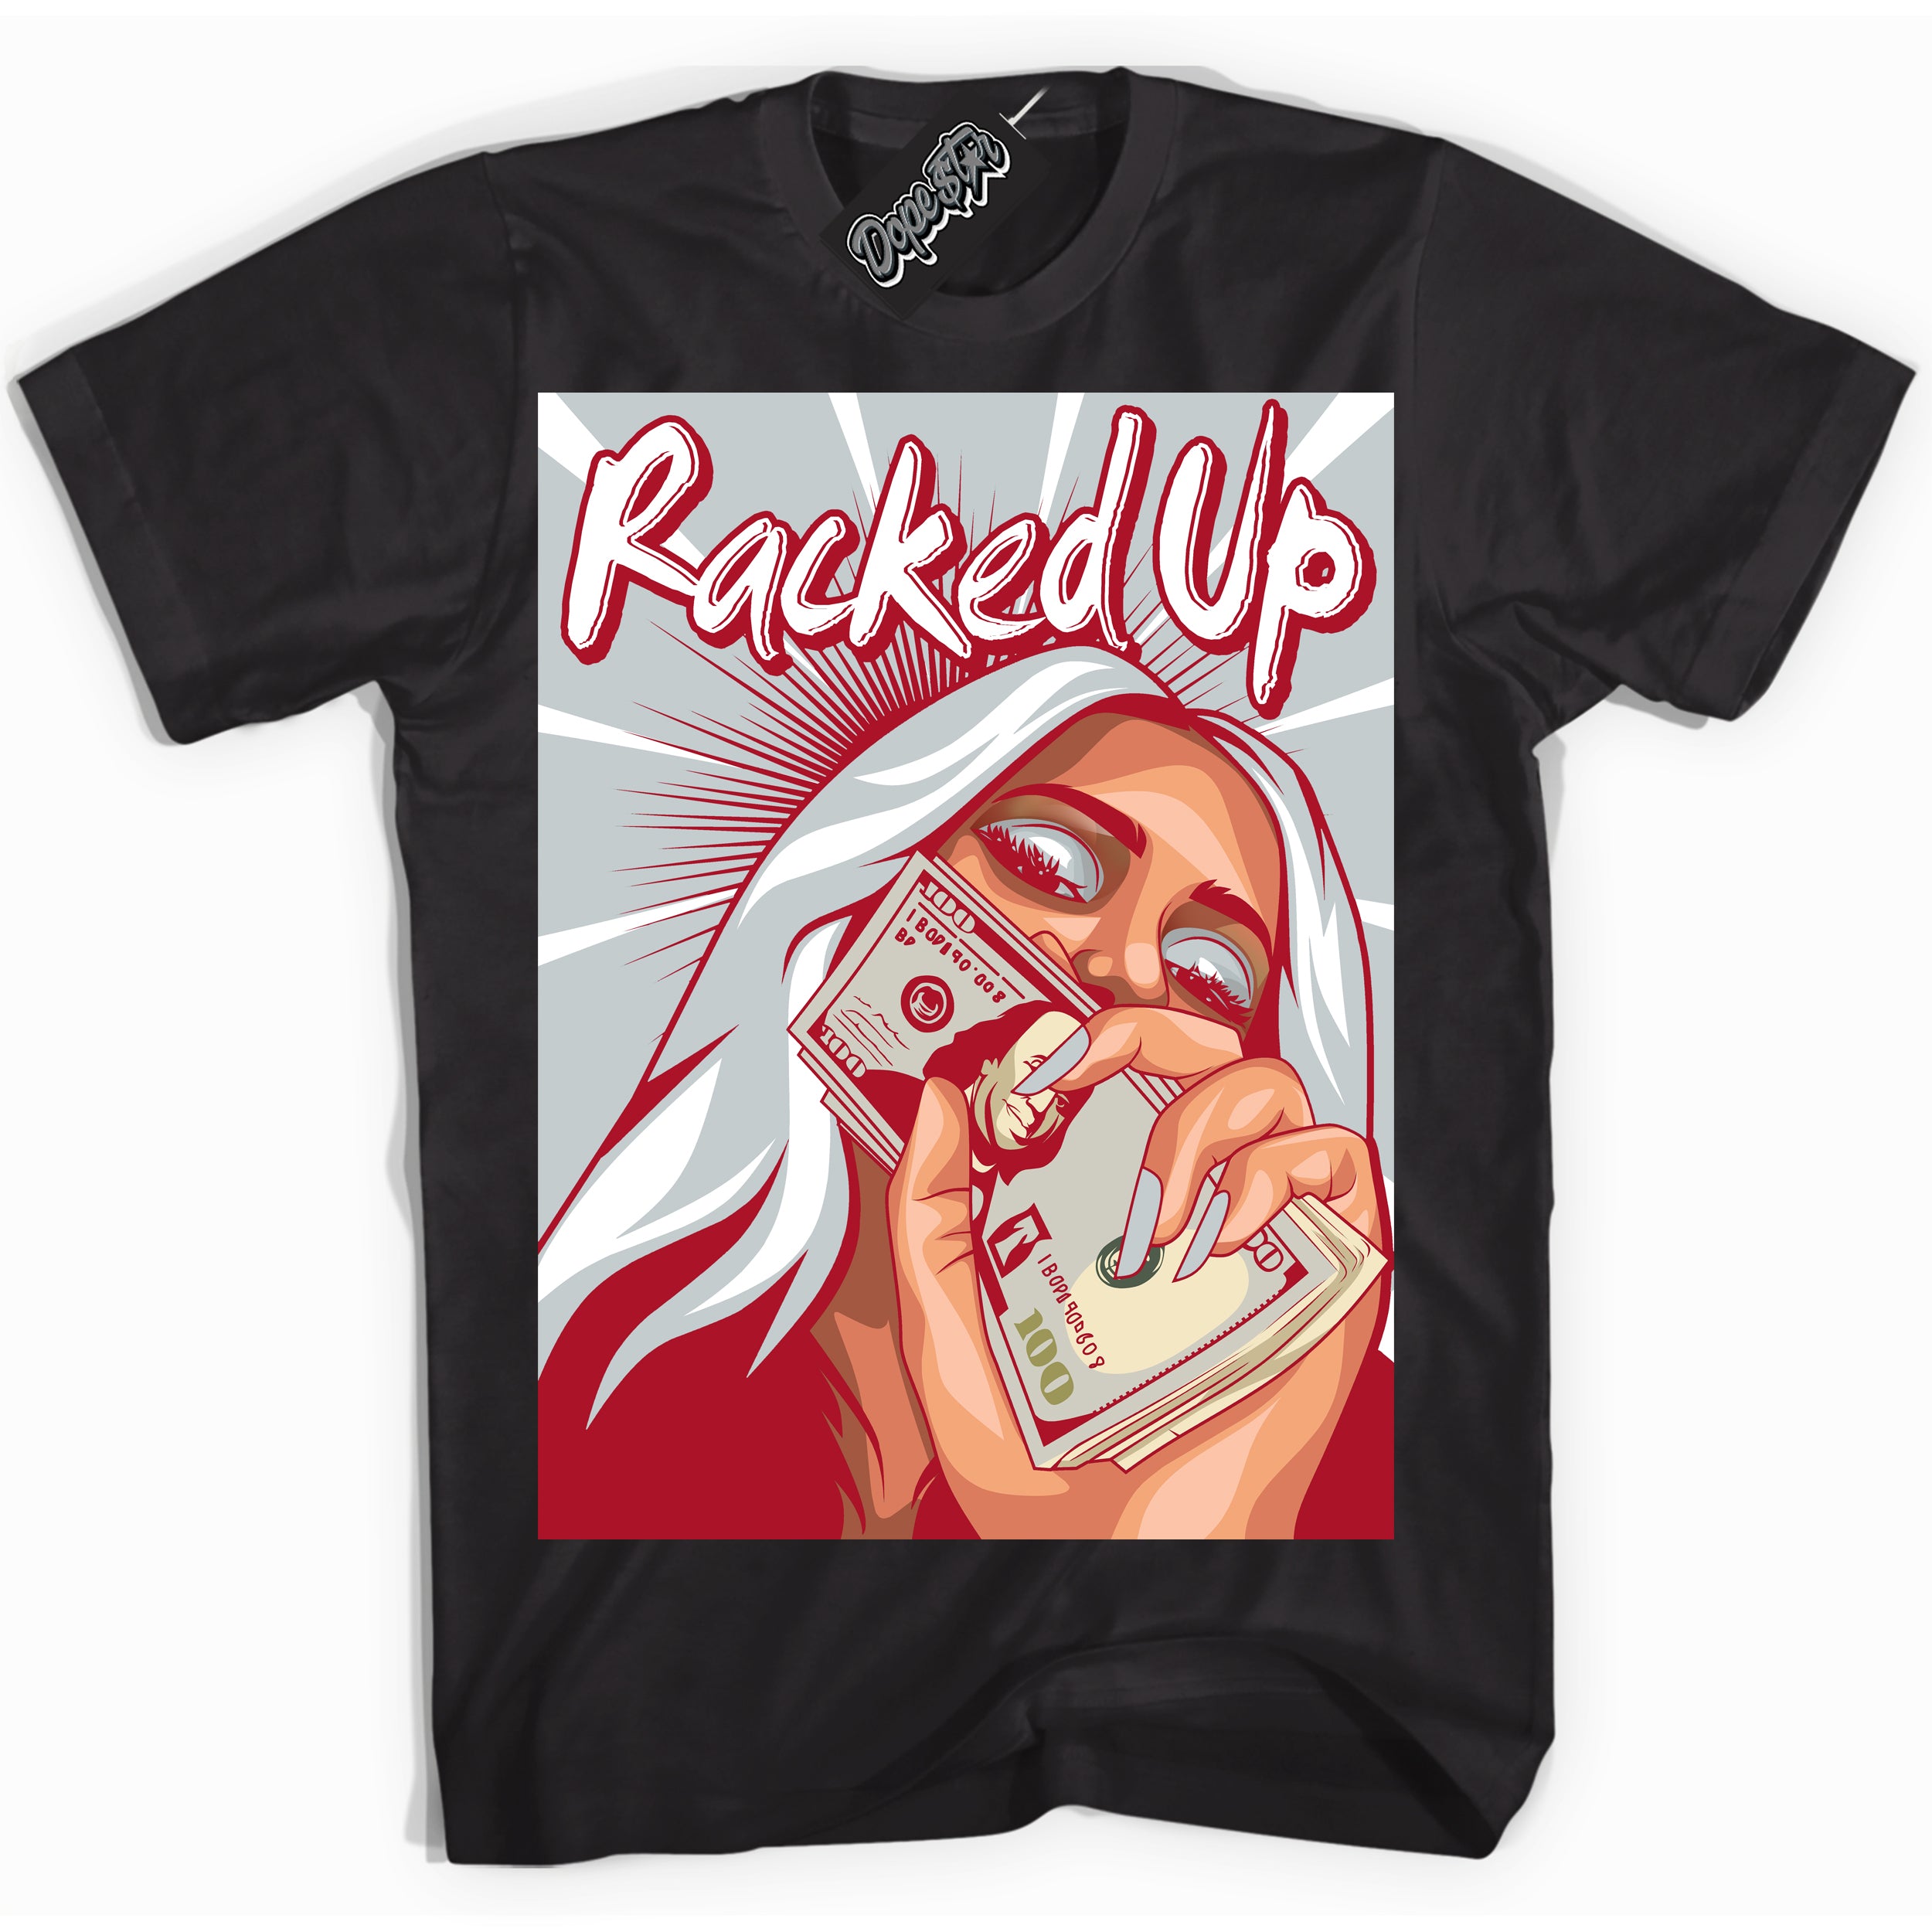 Cool Black Shirt with “ Racked Up ” design that perfectly matches Reverse Ultraman Sneakers.